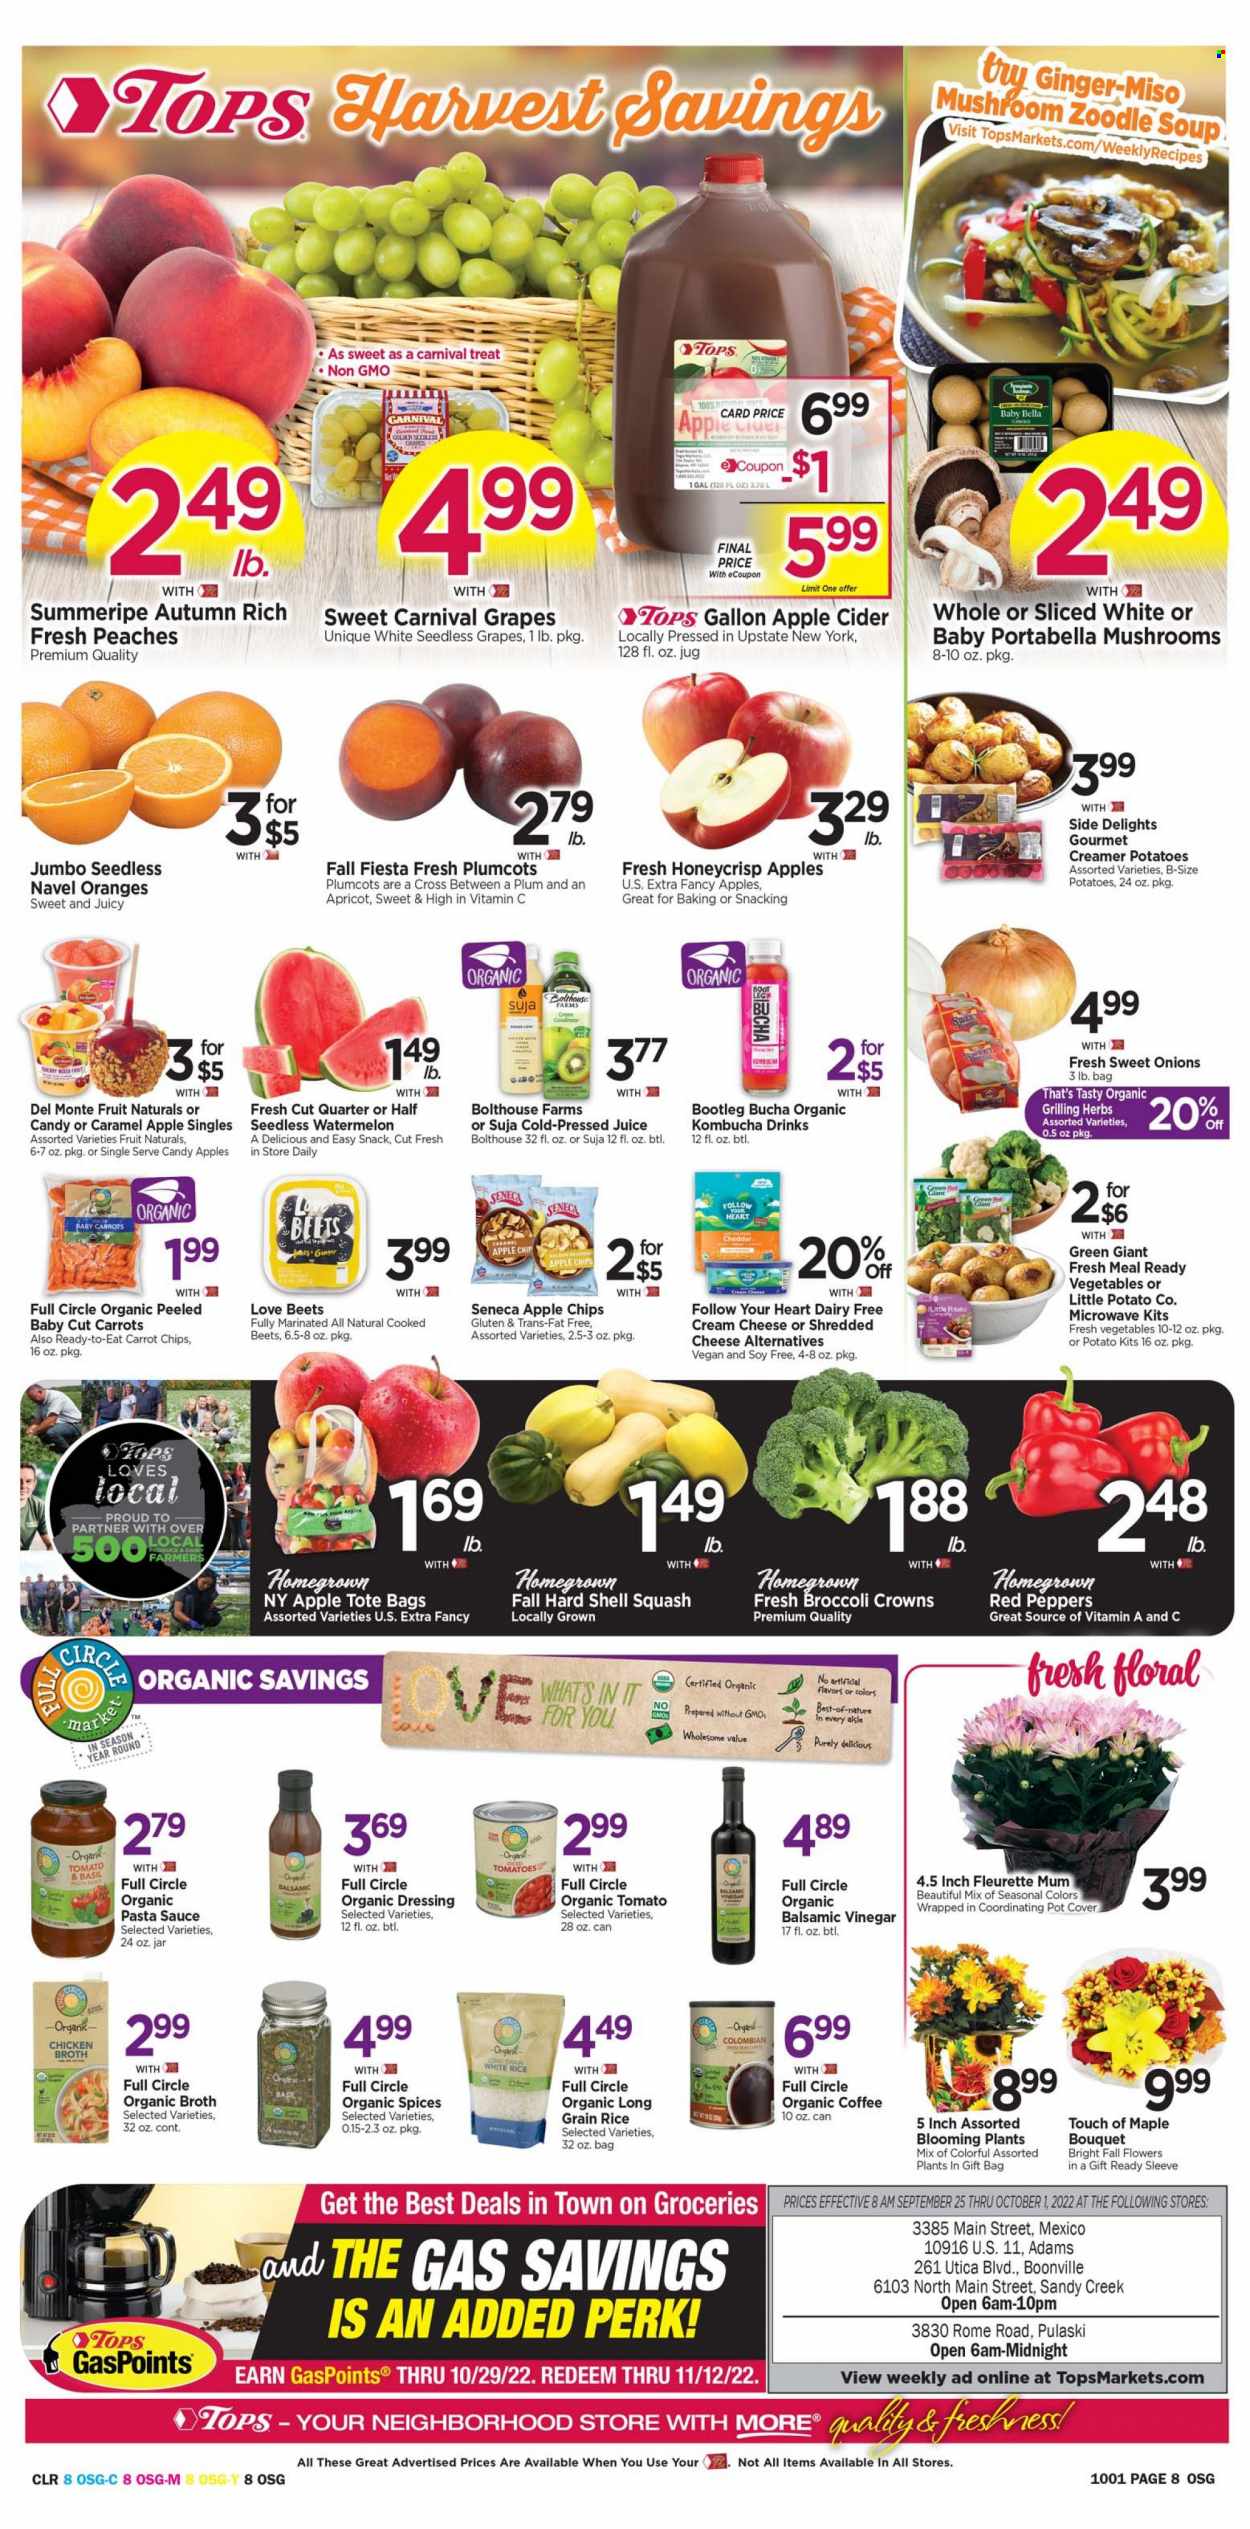 thumbnail - Tops Flyer - 09/25/2022 - 10/01/2022 - Sales products - mushrooms, carrots, ginger, tomatoes, potatoes, peppers, red peppers, grapes, seedless grapes, watermelon, oranges, pasta sauce, soup, sauce, shredded cheese, snack, chips, chicken broth, broth, diced tomatoes, Del Monte, rice, white rice, long grain rice, miso, dressing, balsamic vinegar, juice, kombucha, organic coffee, apple cider, cider, pot, bouquet, peaches, navel oranges. Page 8.